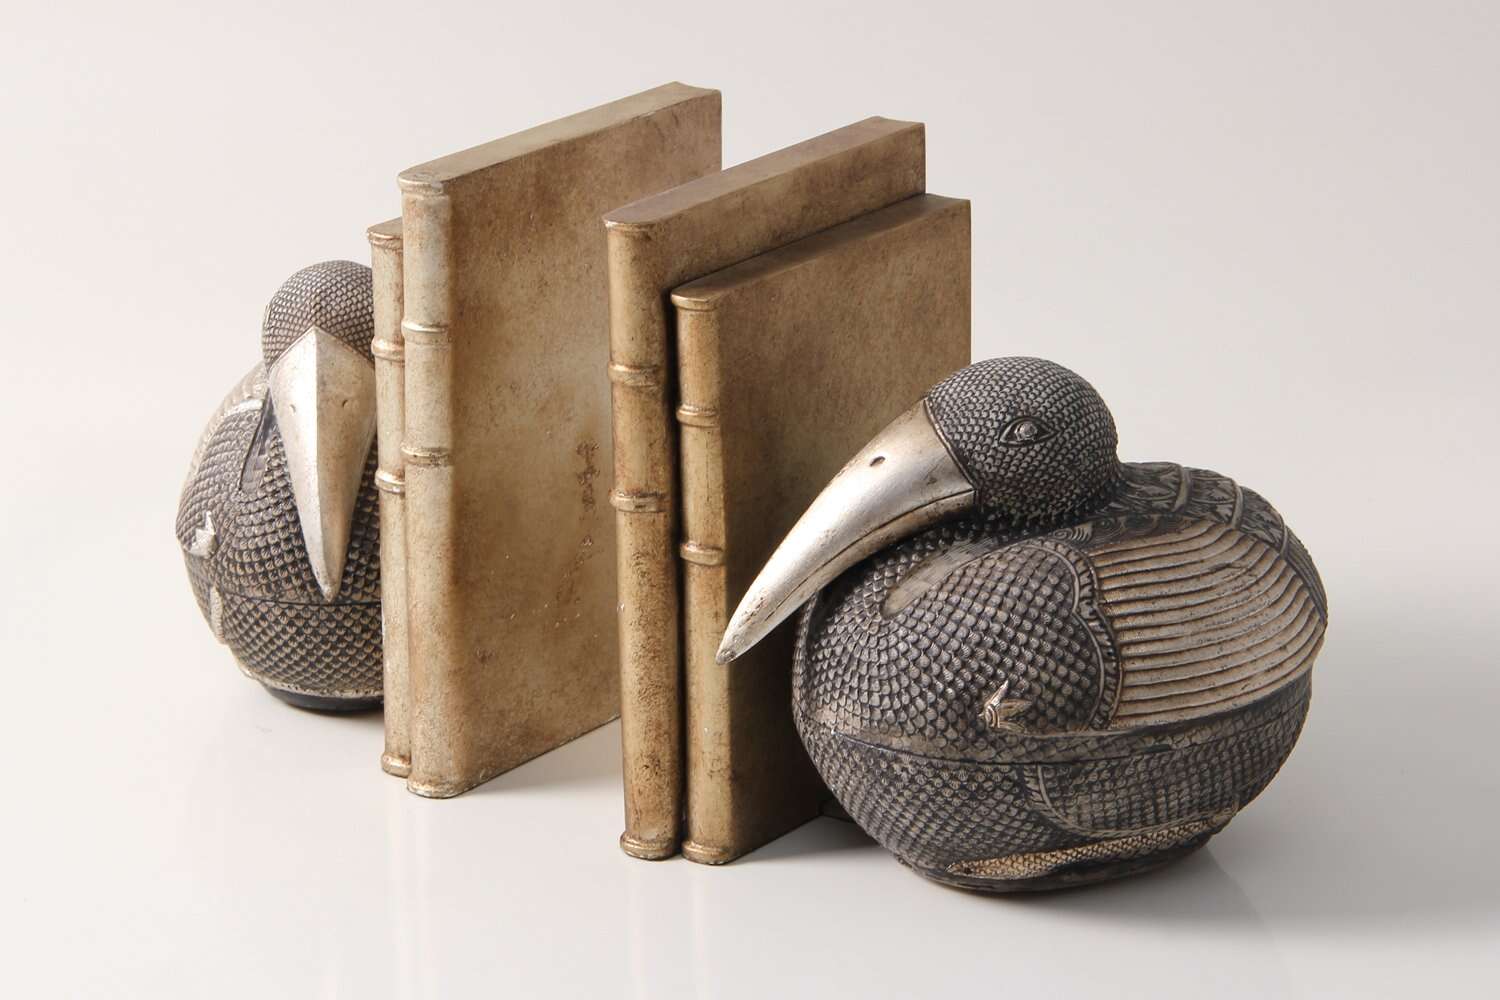 stylish bookends charming bookends beautiful bookends